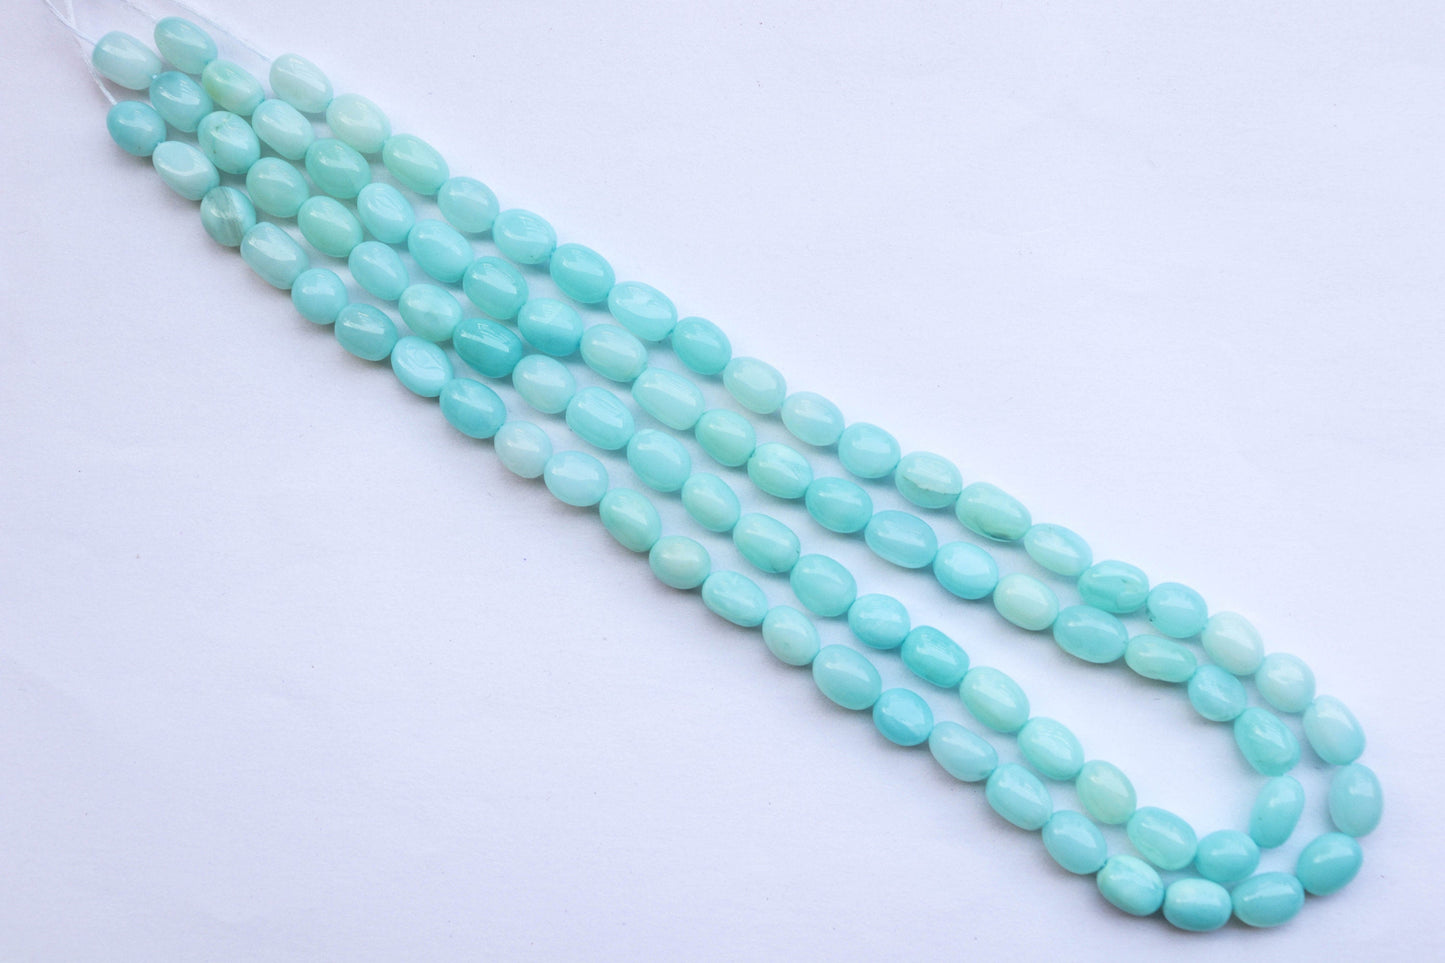 16 inch Blue Opal Beads Smooth Oval shape | 7x10mm | 60 Pieces Approx | Center drill | Natural Gemstone Beads for jewelry making Beadsforyourjewelry